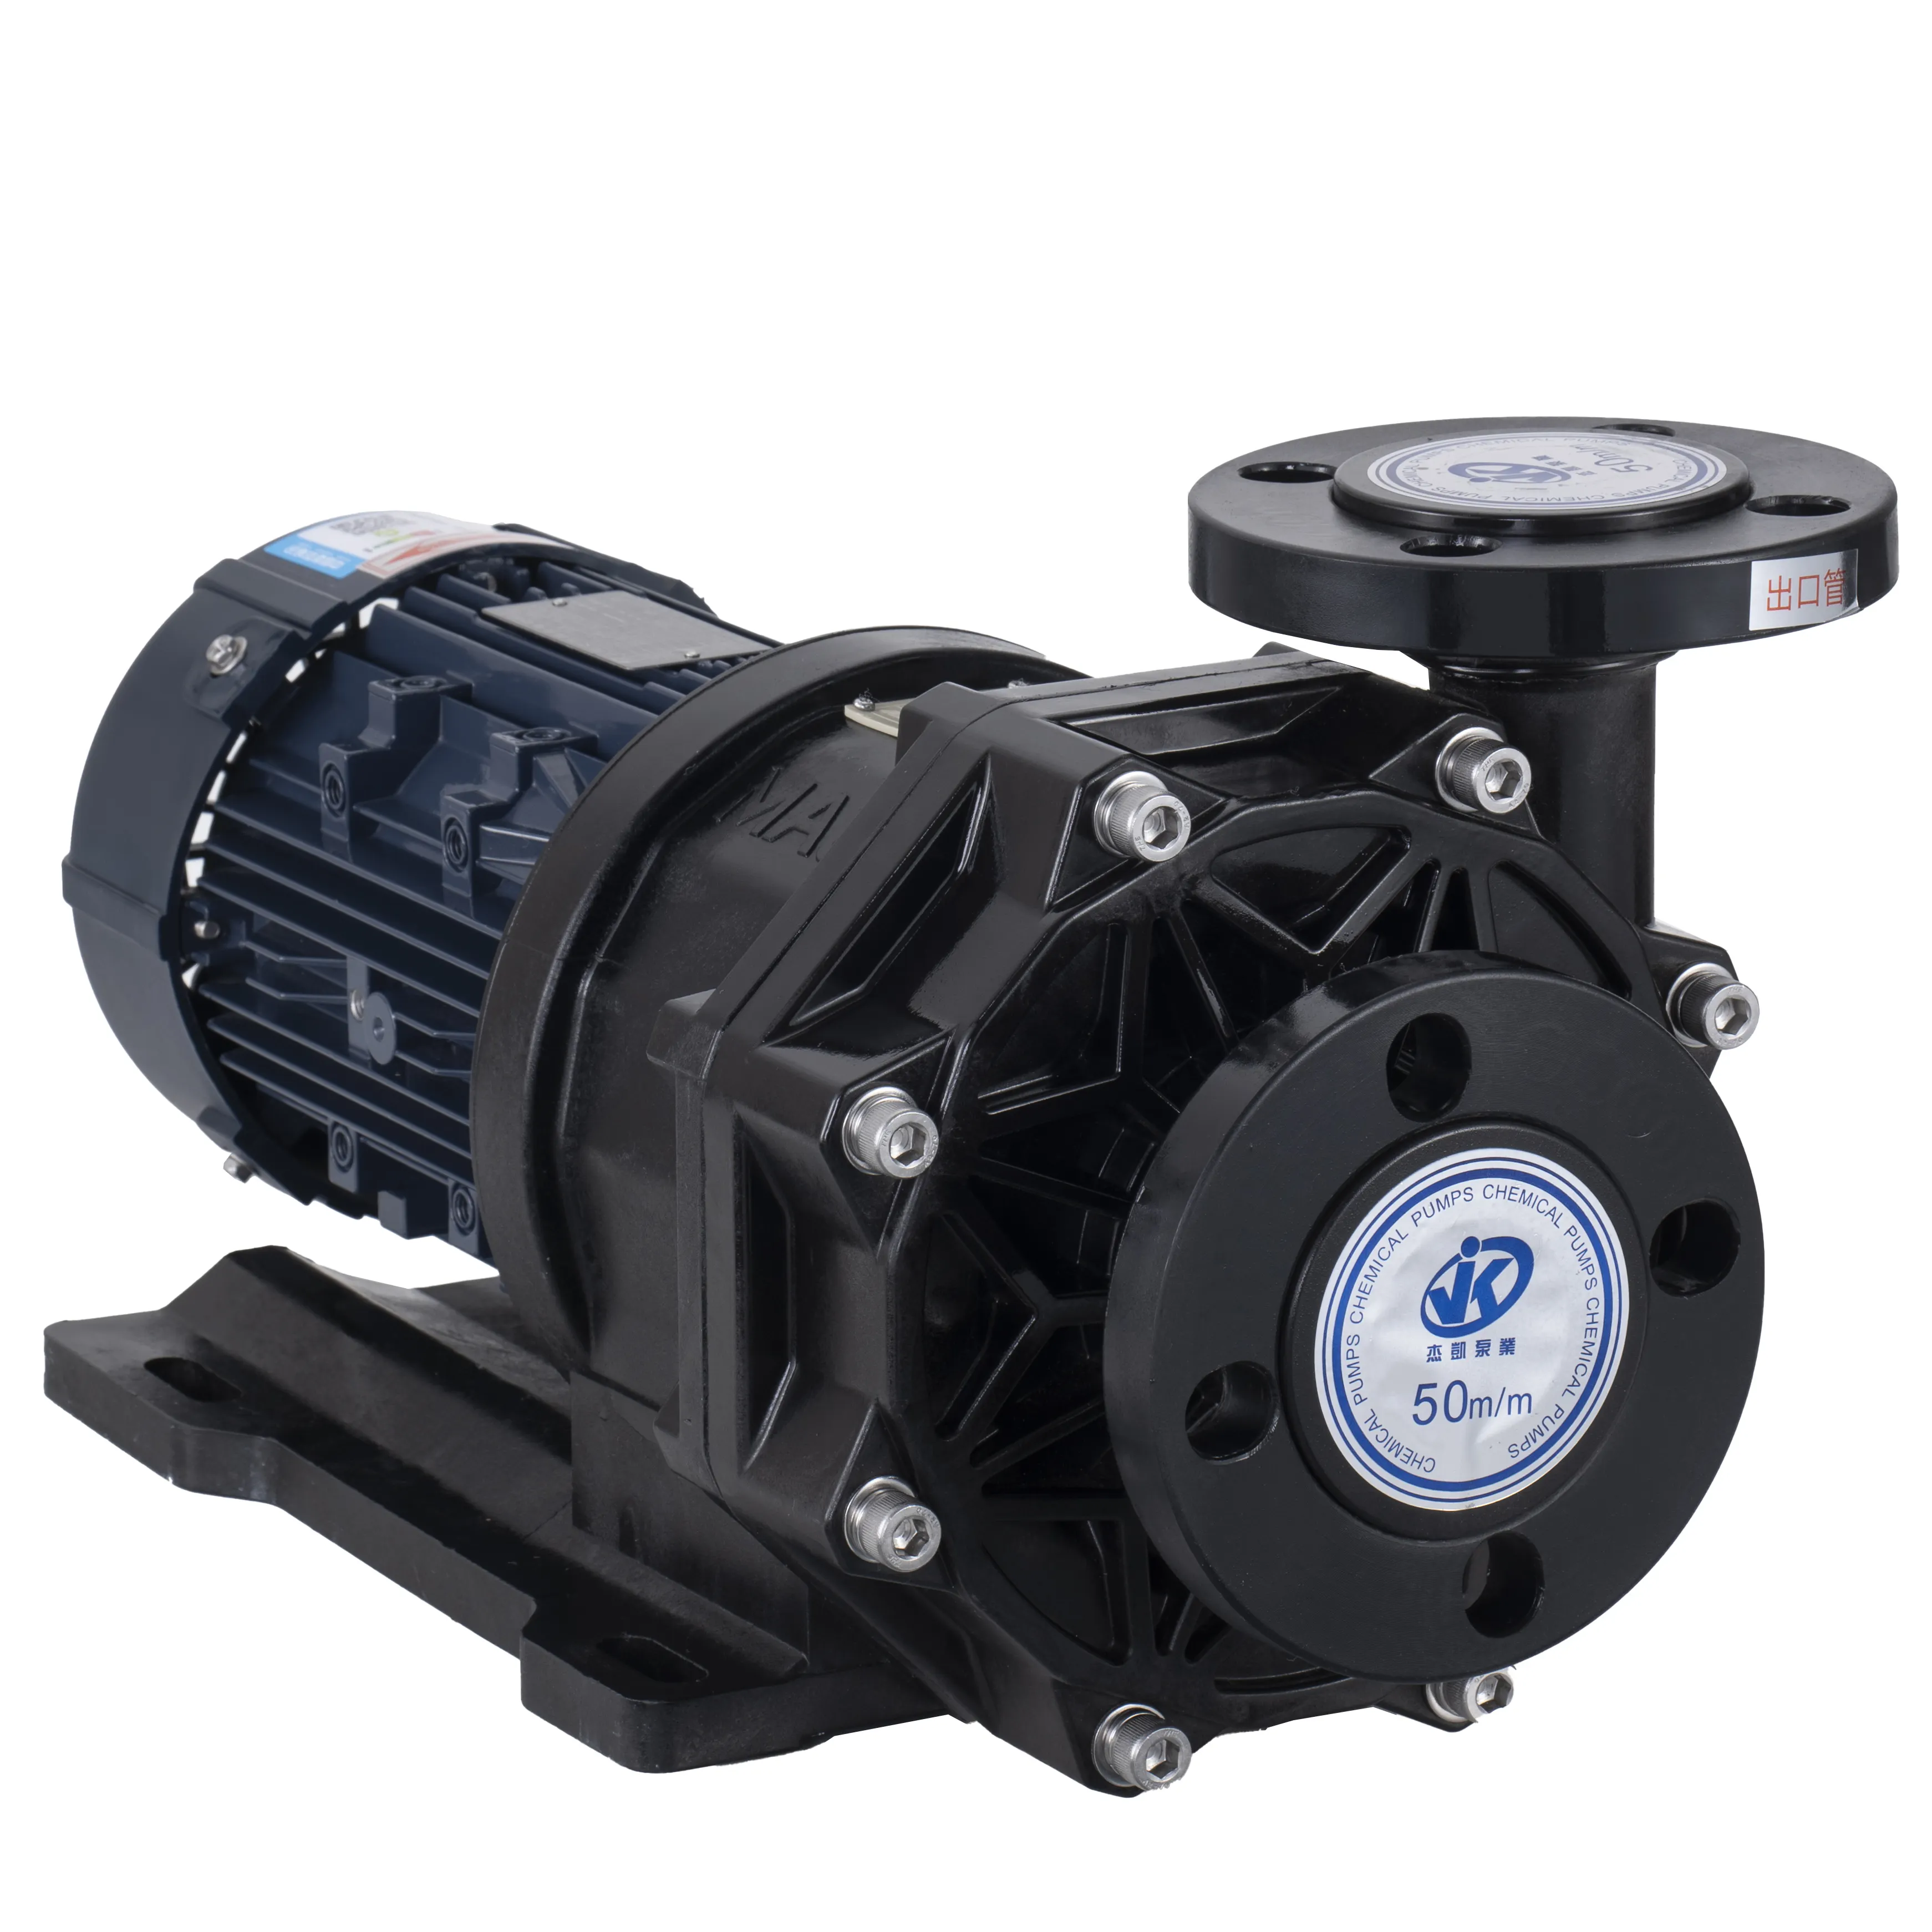 MG Series circulation pump for chemicals centrifugal chemical magnetic drive liquid transfer pumps